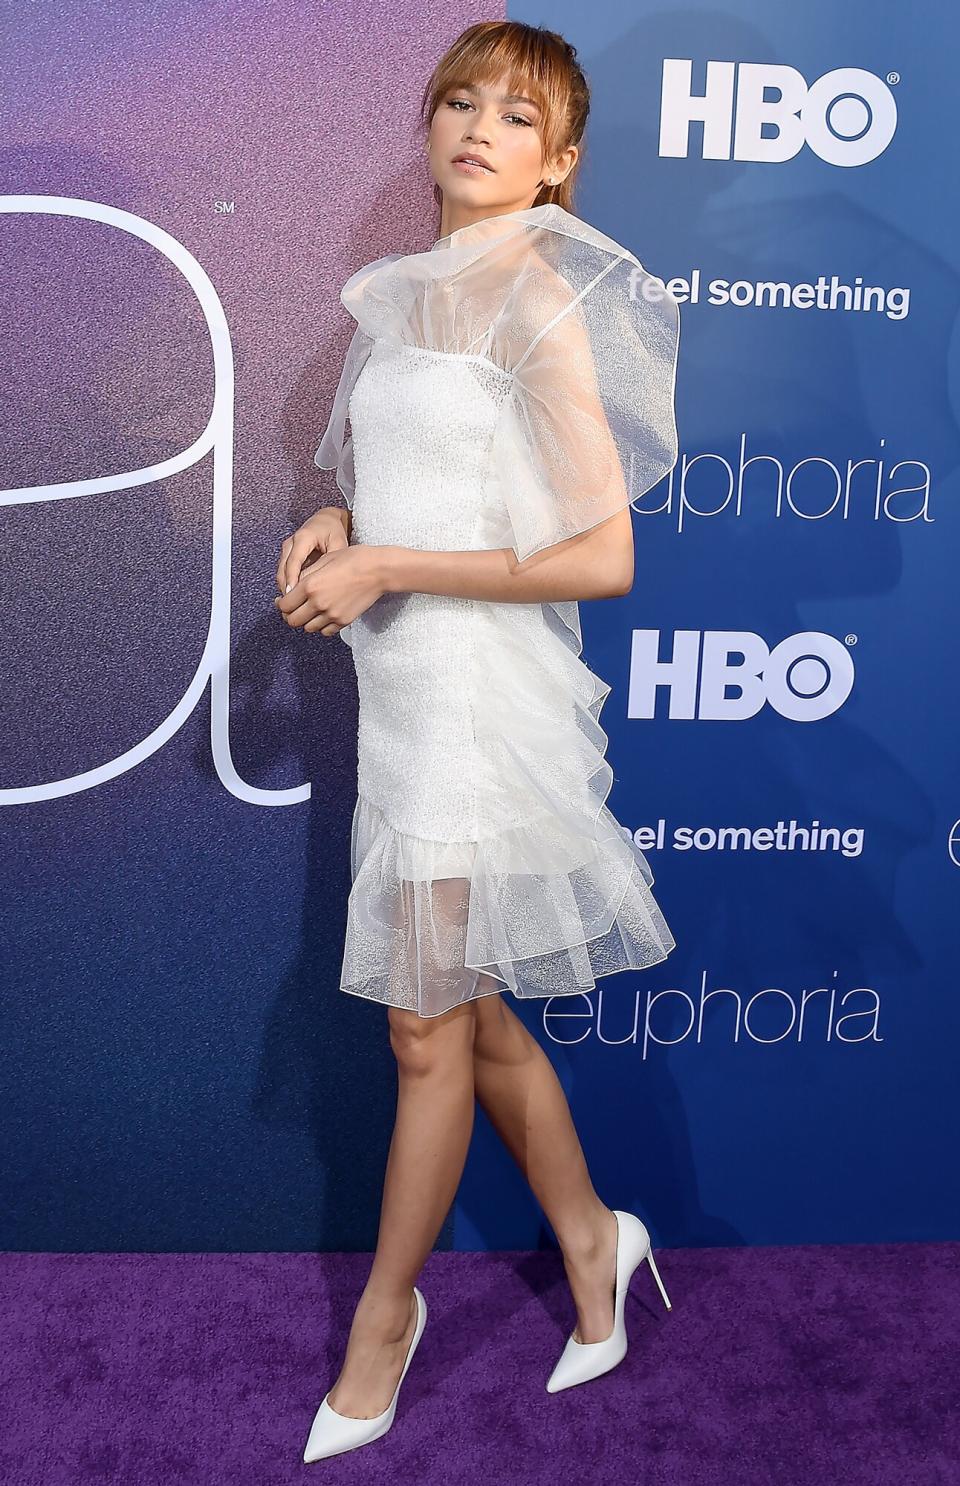 Zendaya arrives at the LA Premiere Of HBO's "Euphoria" at The Cinerama Dome on June 4, 2019 in Los Angeles, California